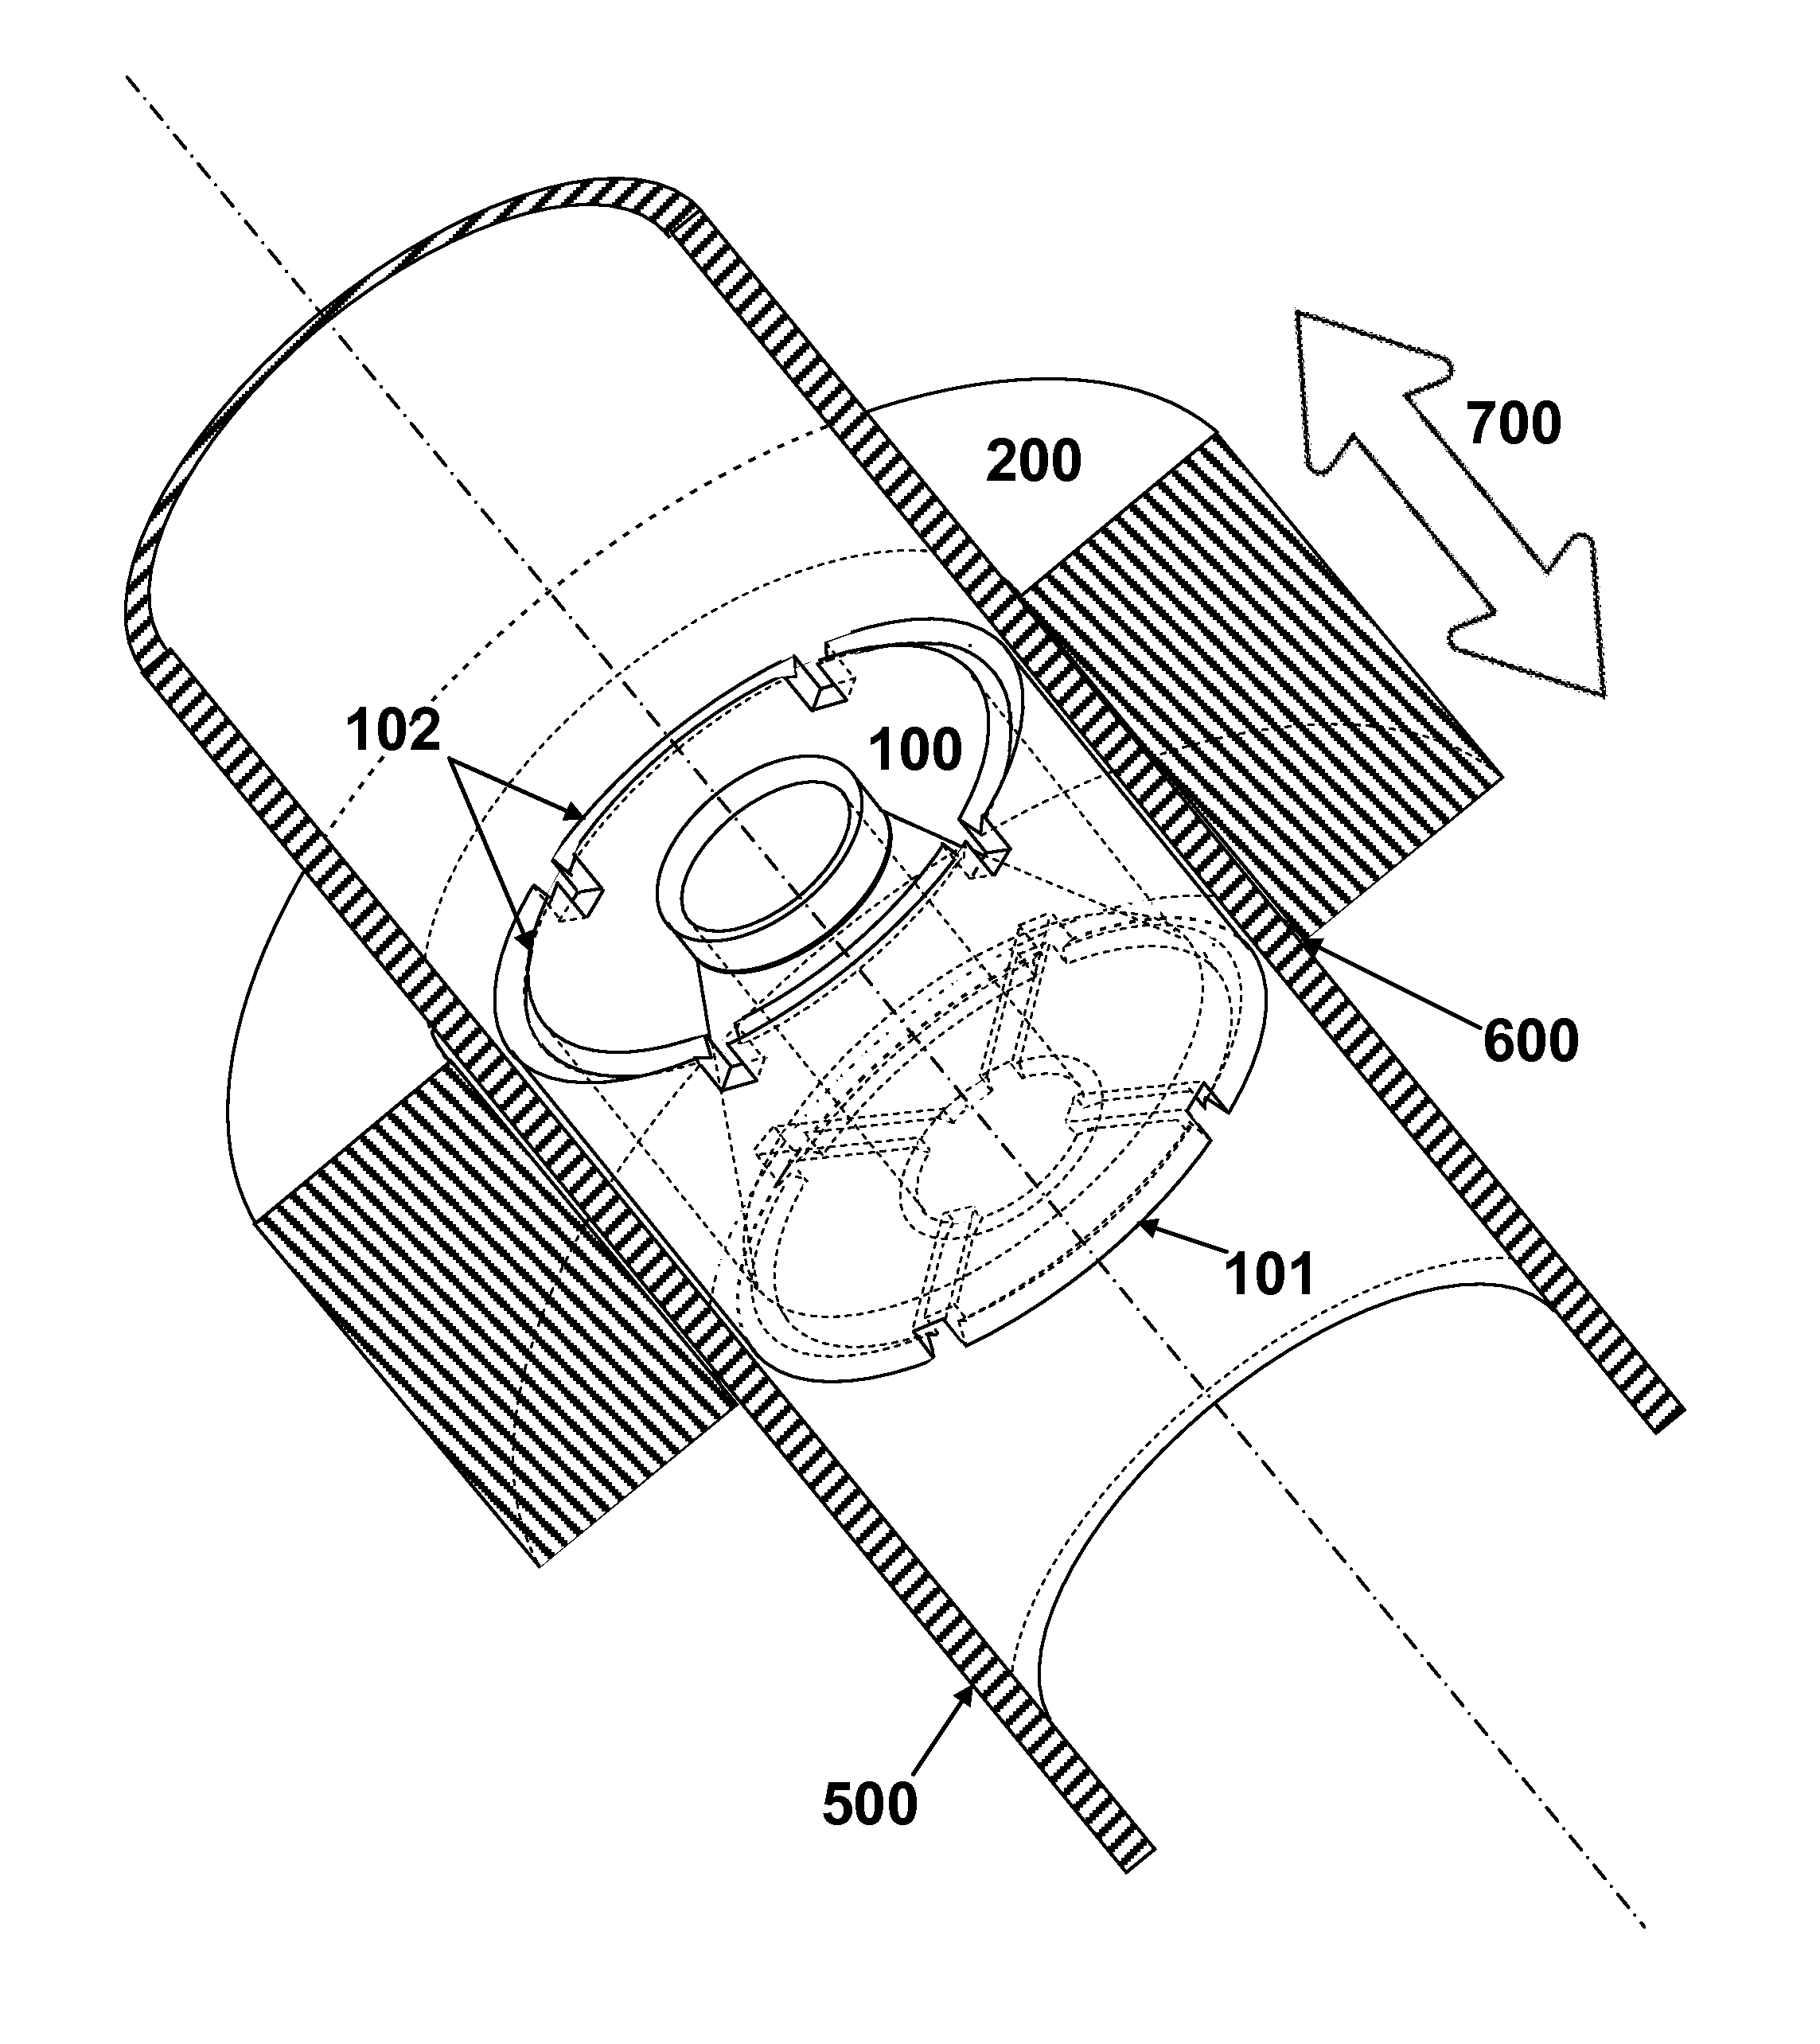 Anti-fouling apparatus for cleaning deposits in pipes and pipe joints